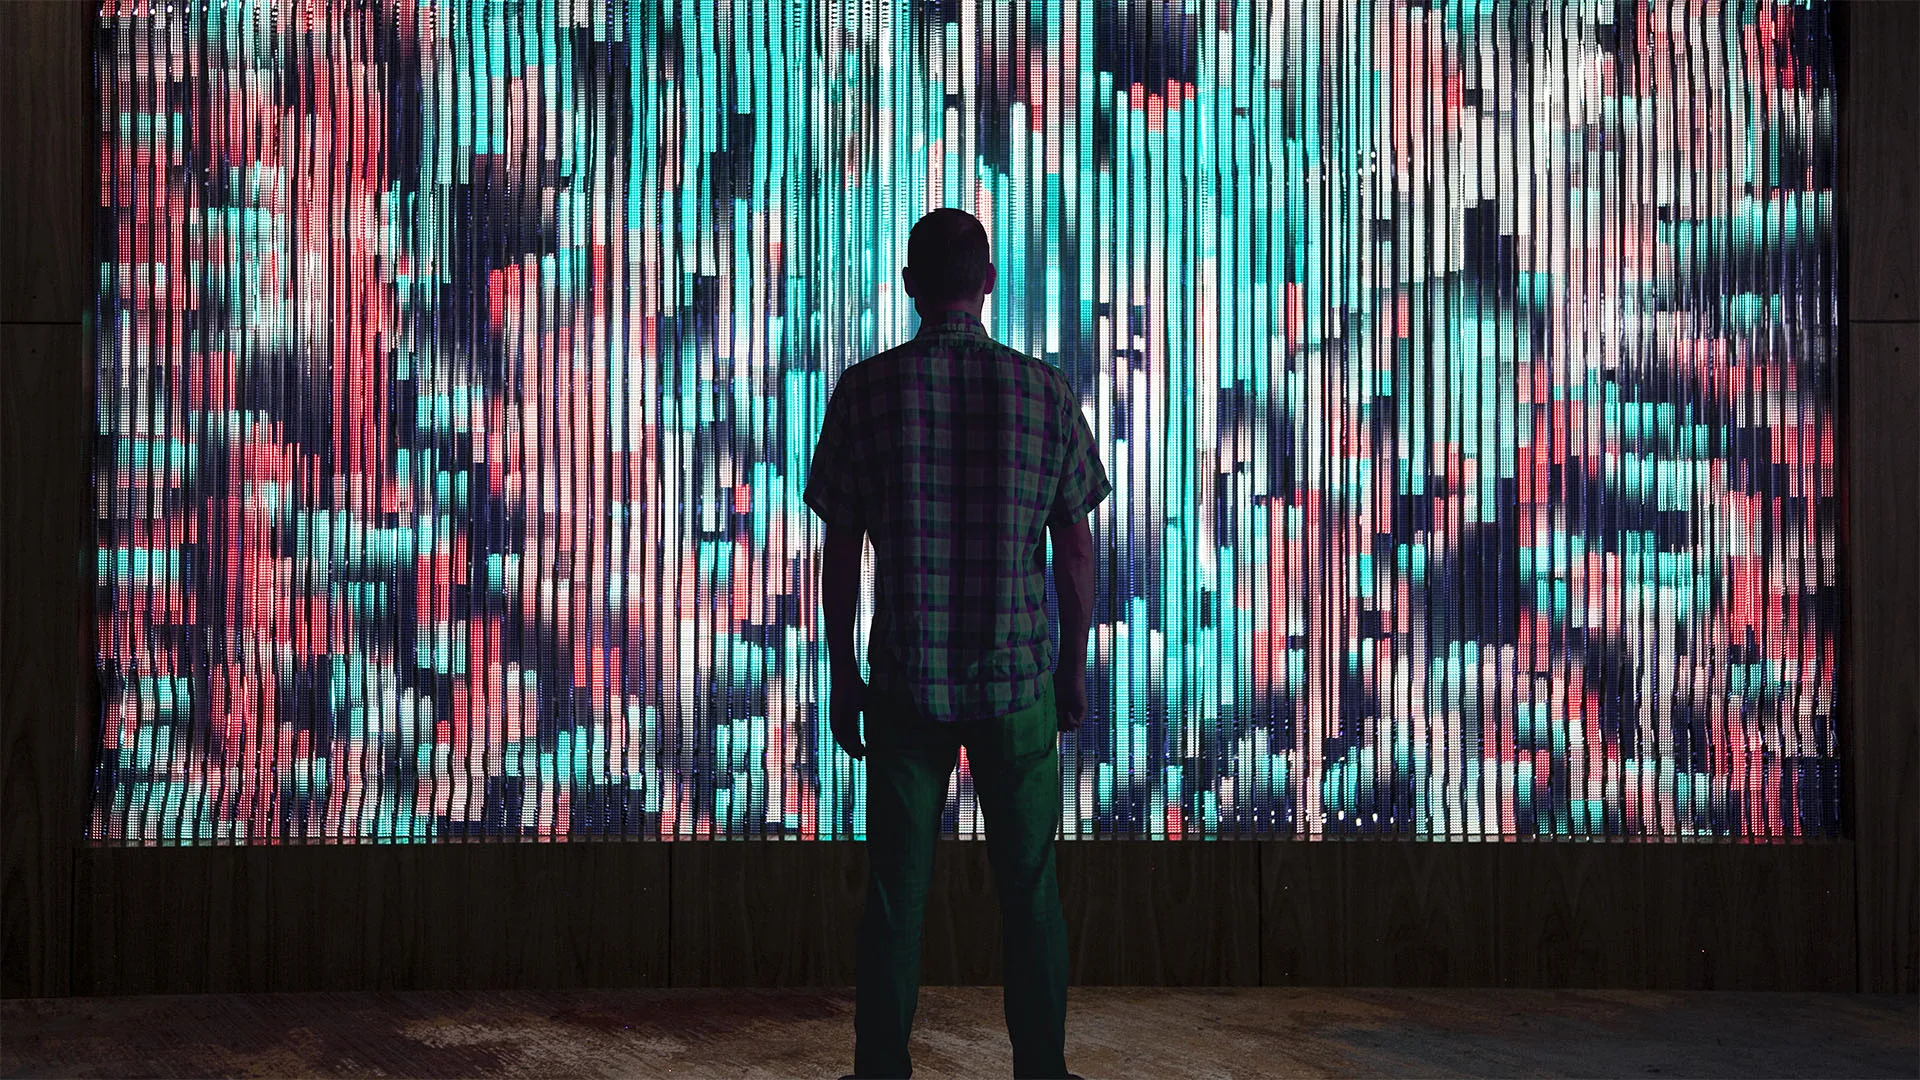 Expression Wall: A touchenabled artful LED wall